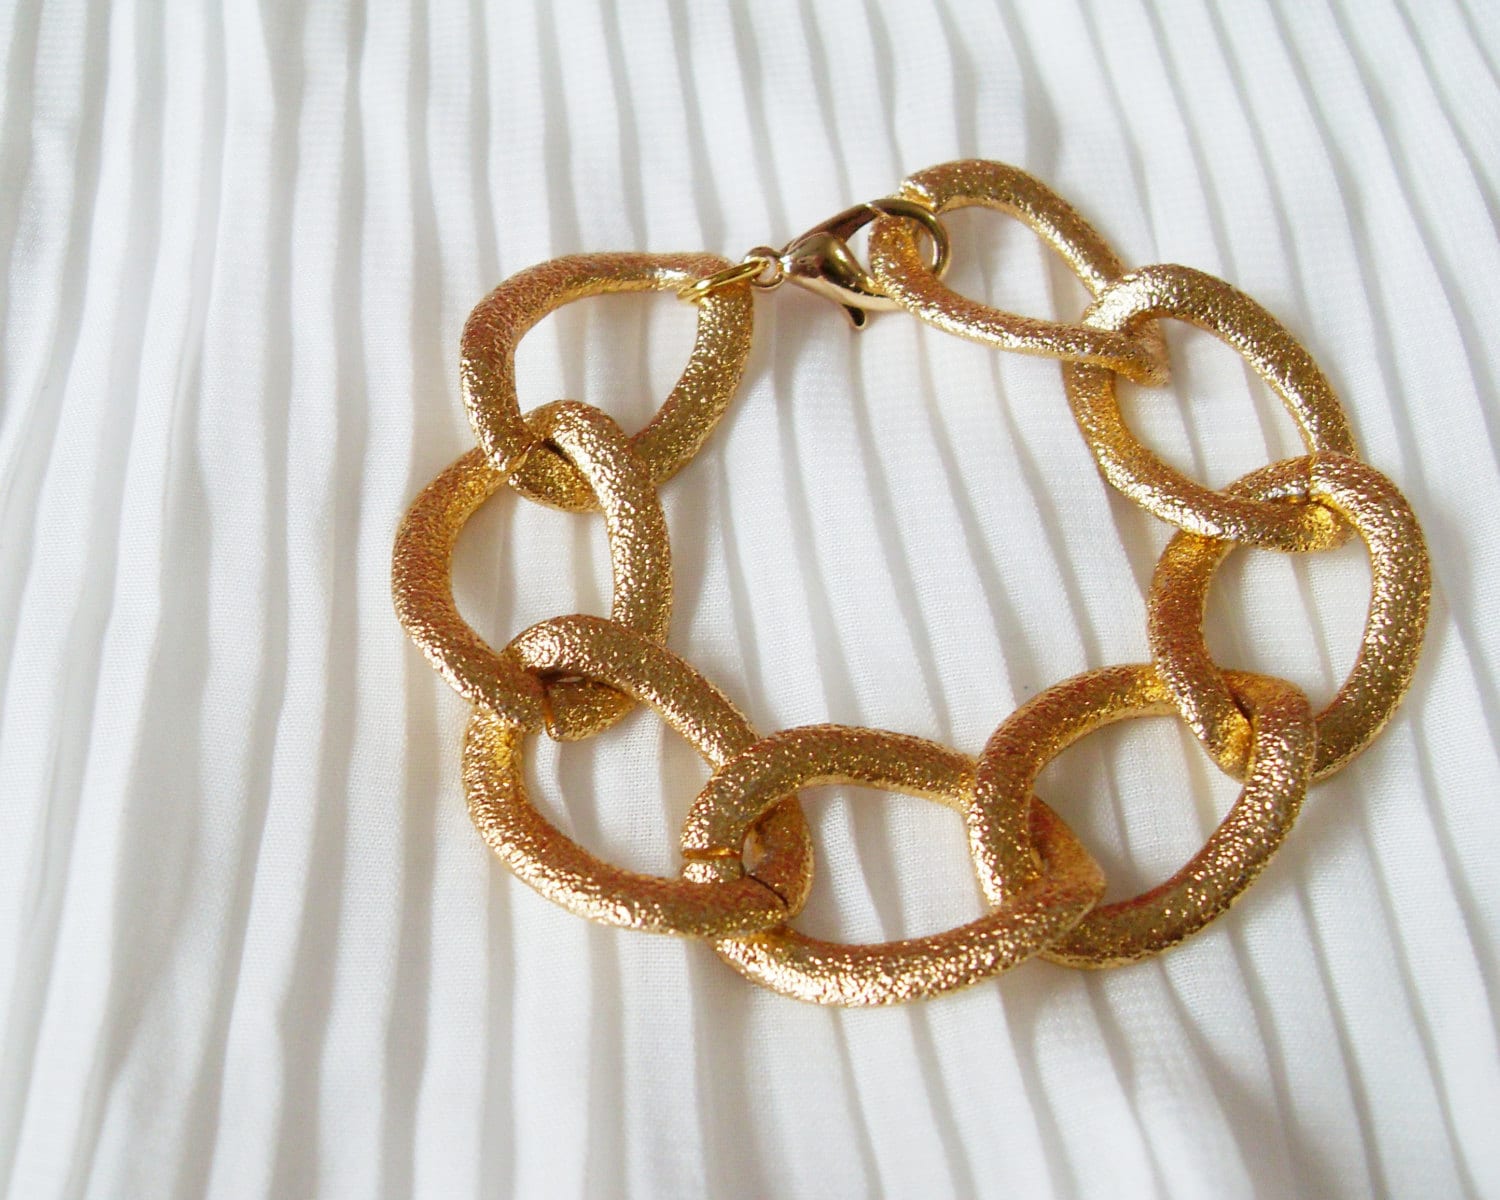 Oversize Textured Gold Chain Bracelet. A Chunky by PlanetPicnic